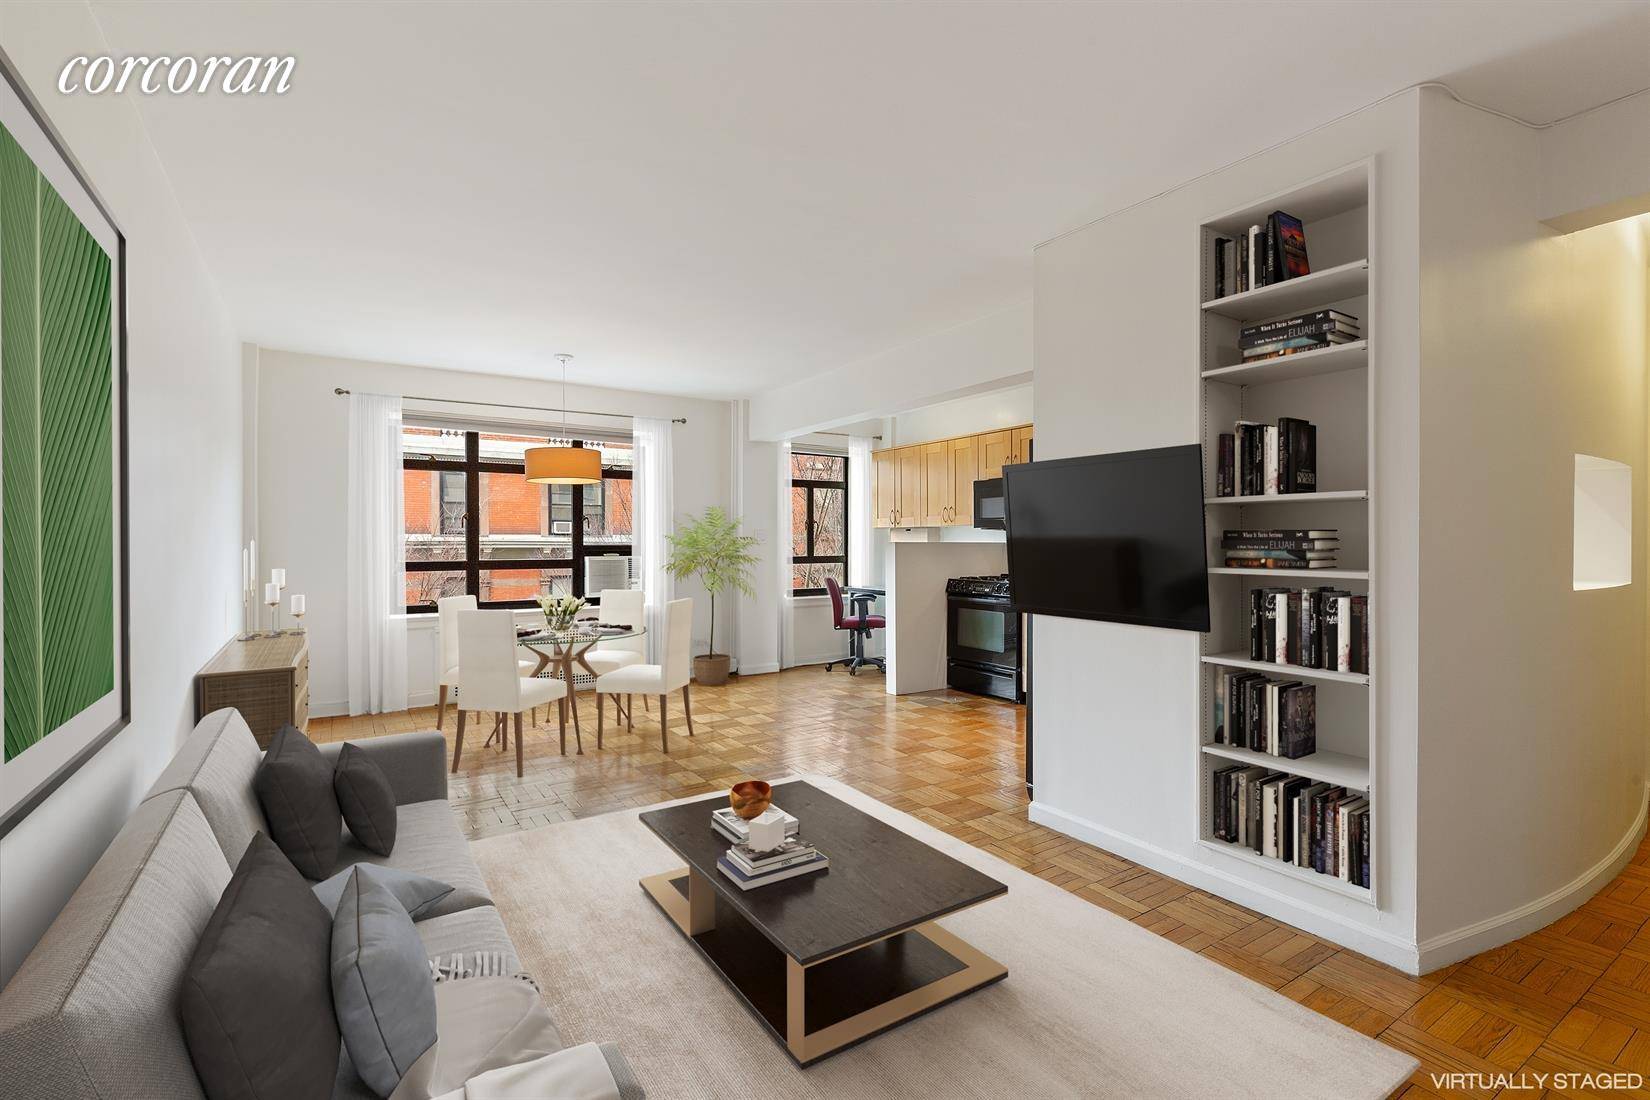 Grab this opportunity to rent this one bedroom home in a doorman, elevator building within blocks of all your favorite urban conveniences and the famous Brooklyn Heights Promenade and the ...